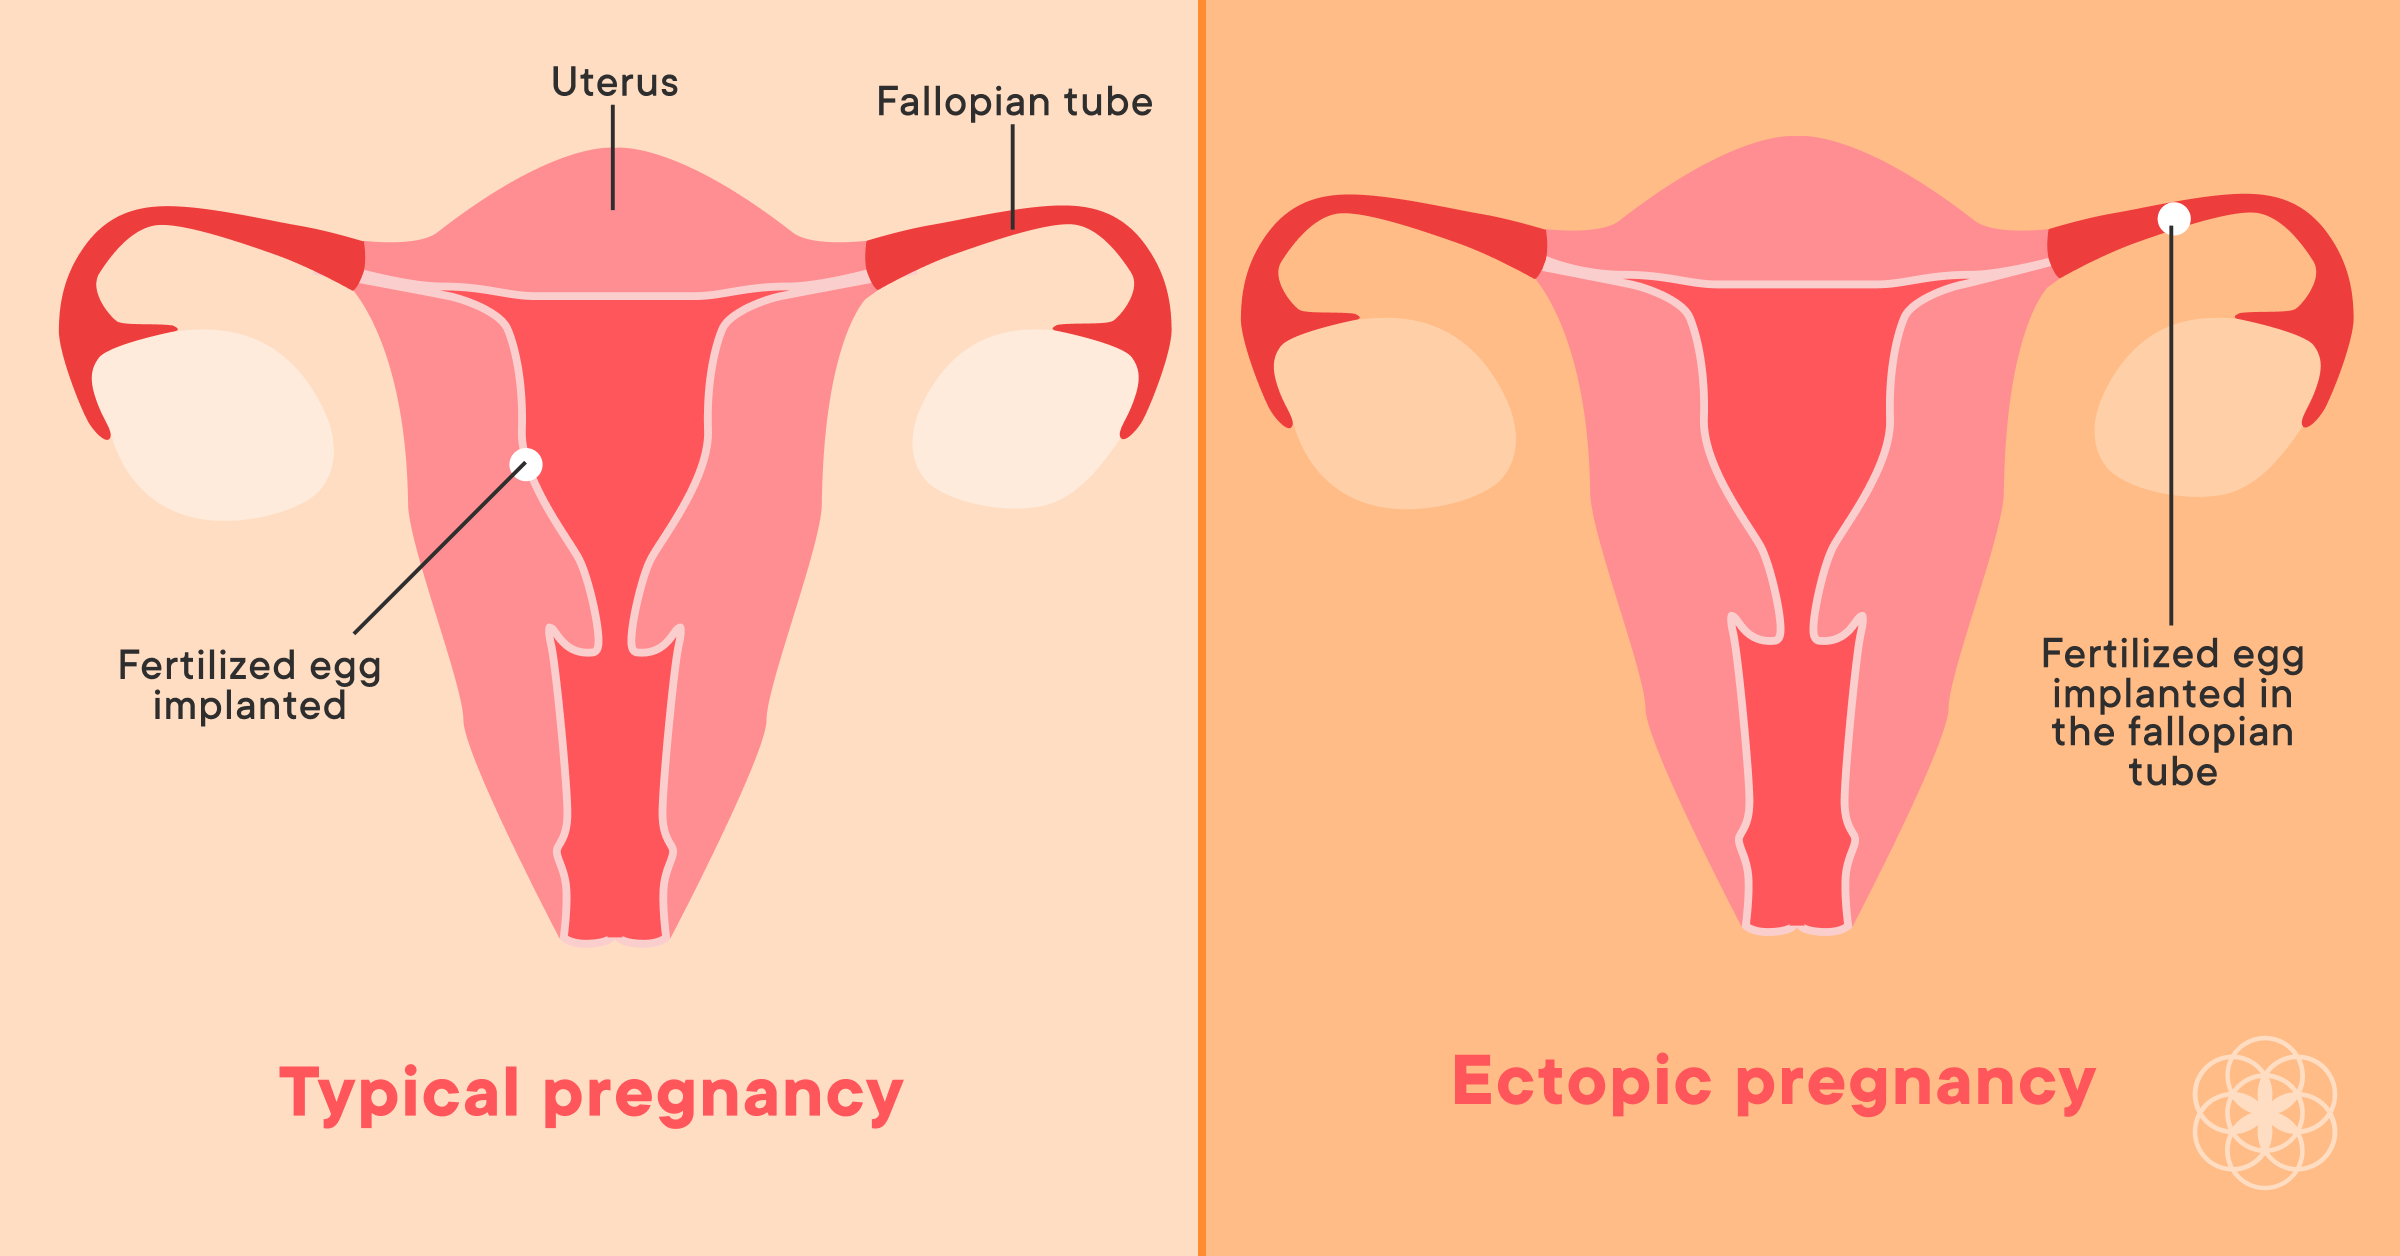 Ectopic pregnancy is rare. Here's what you need to know.